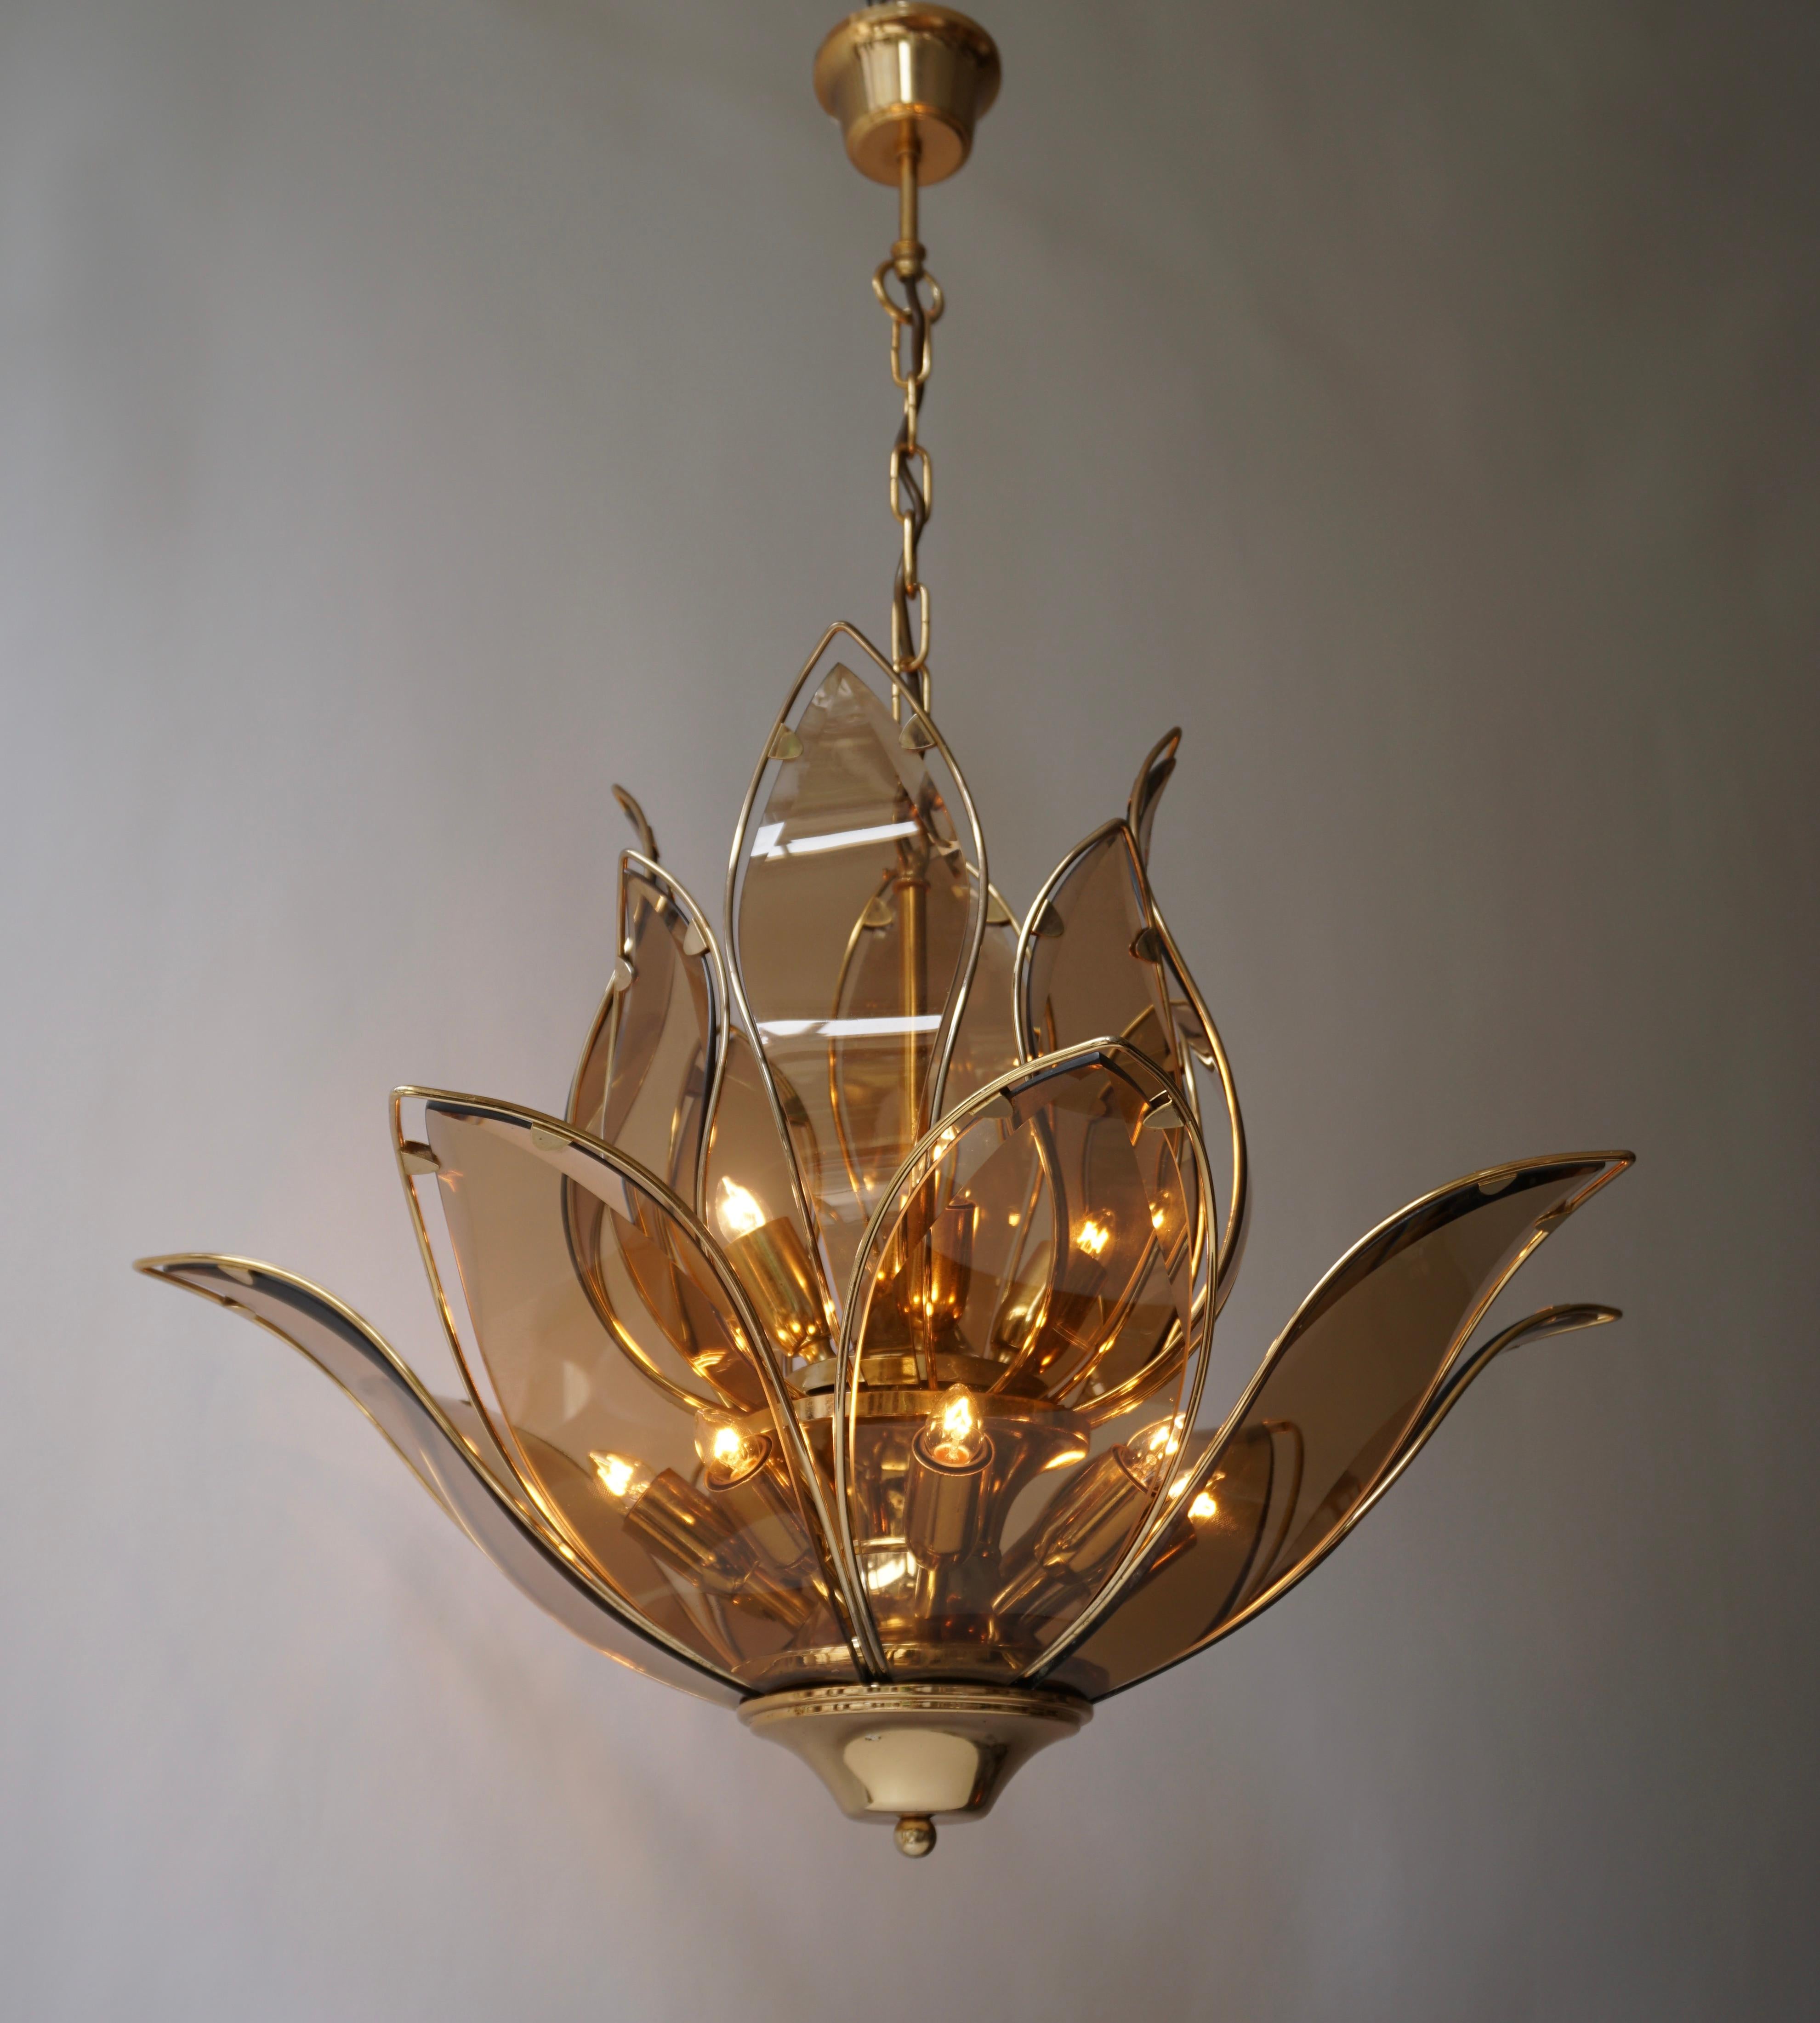 Set of Three Midcentury Chandeliers in Brass and Glass 1